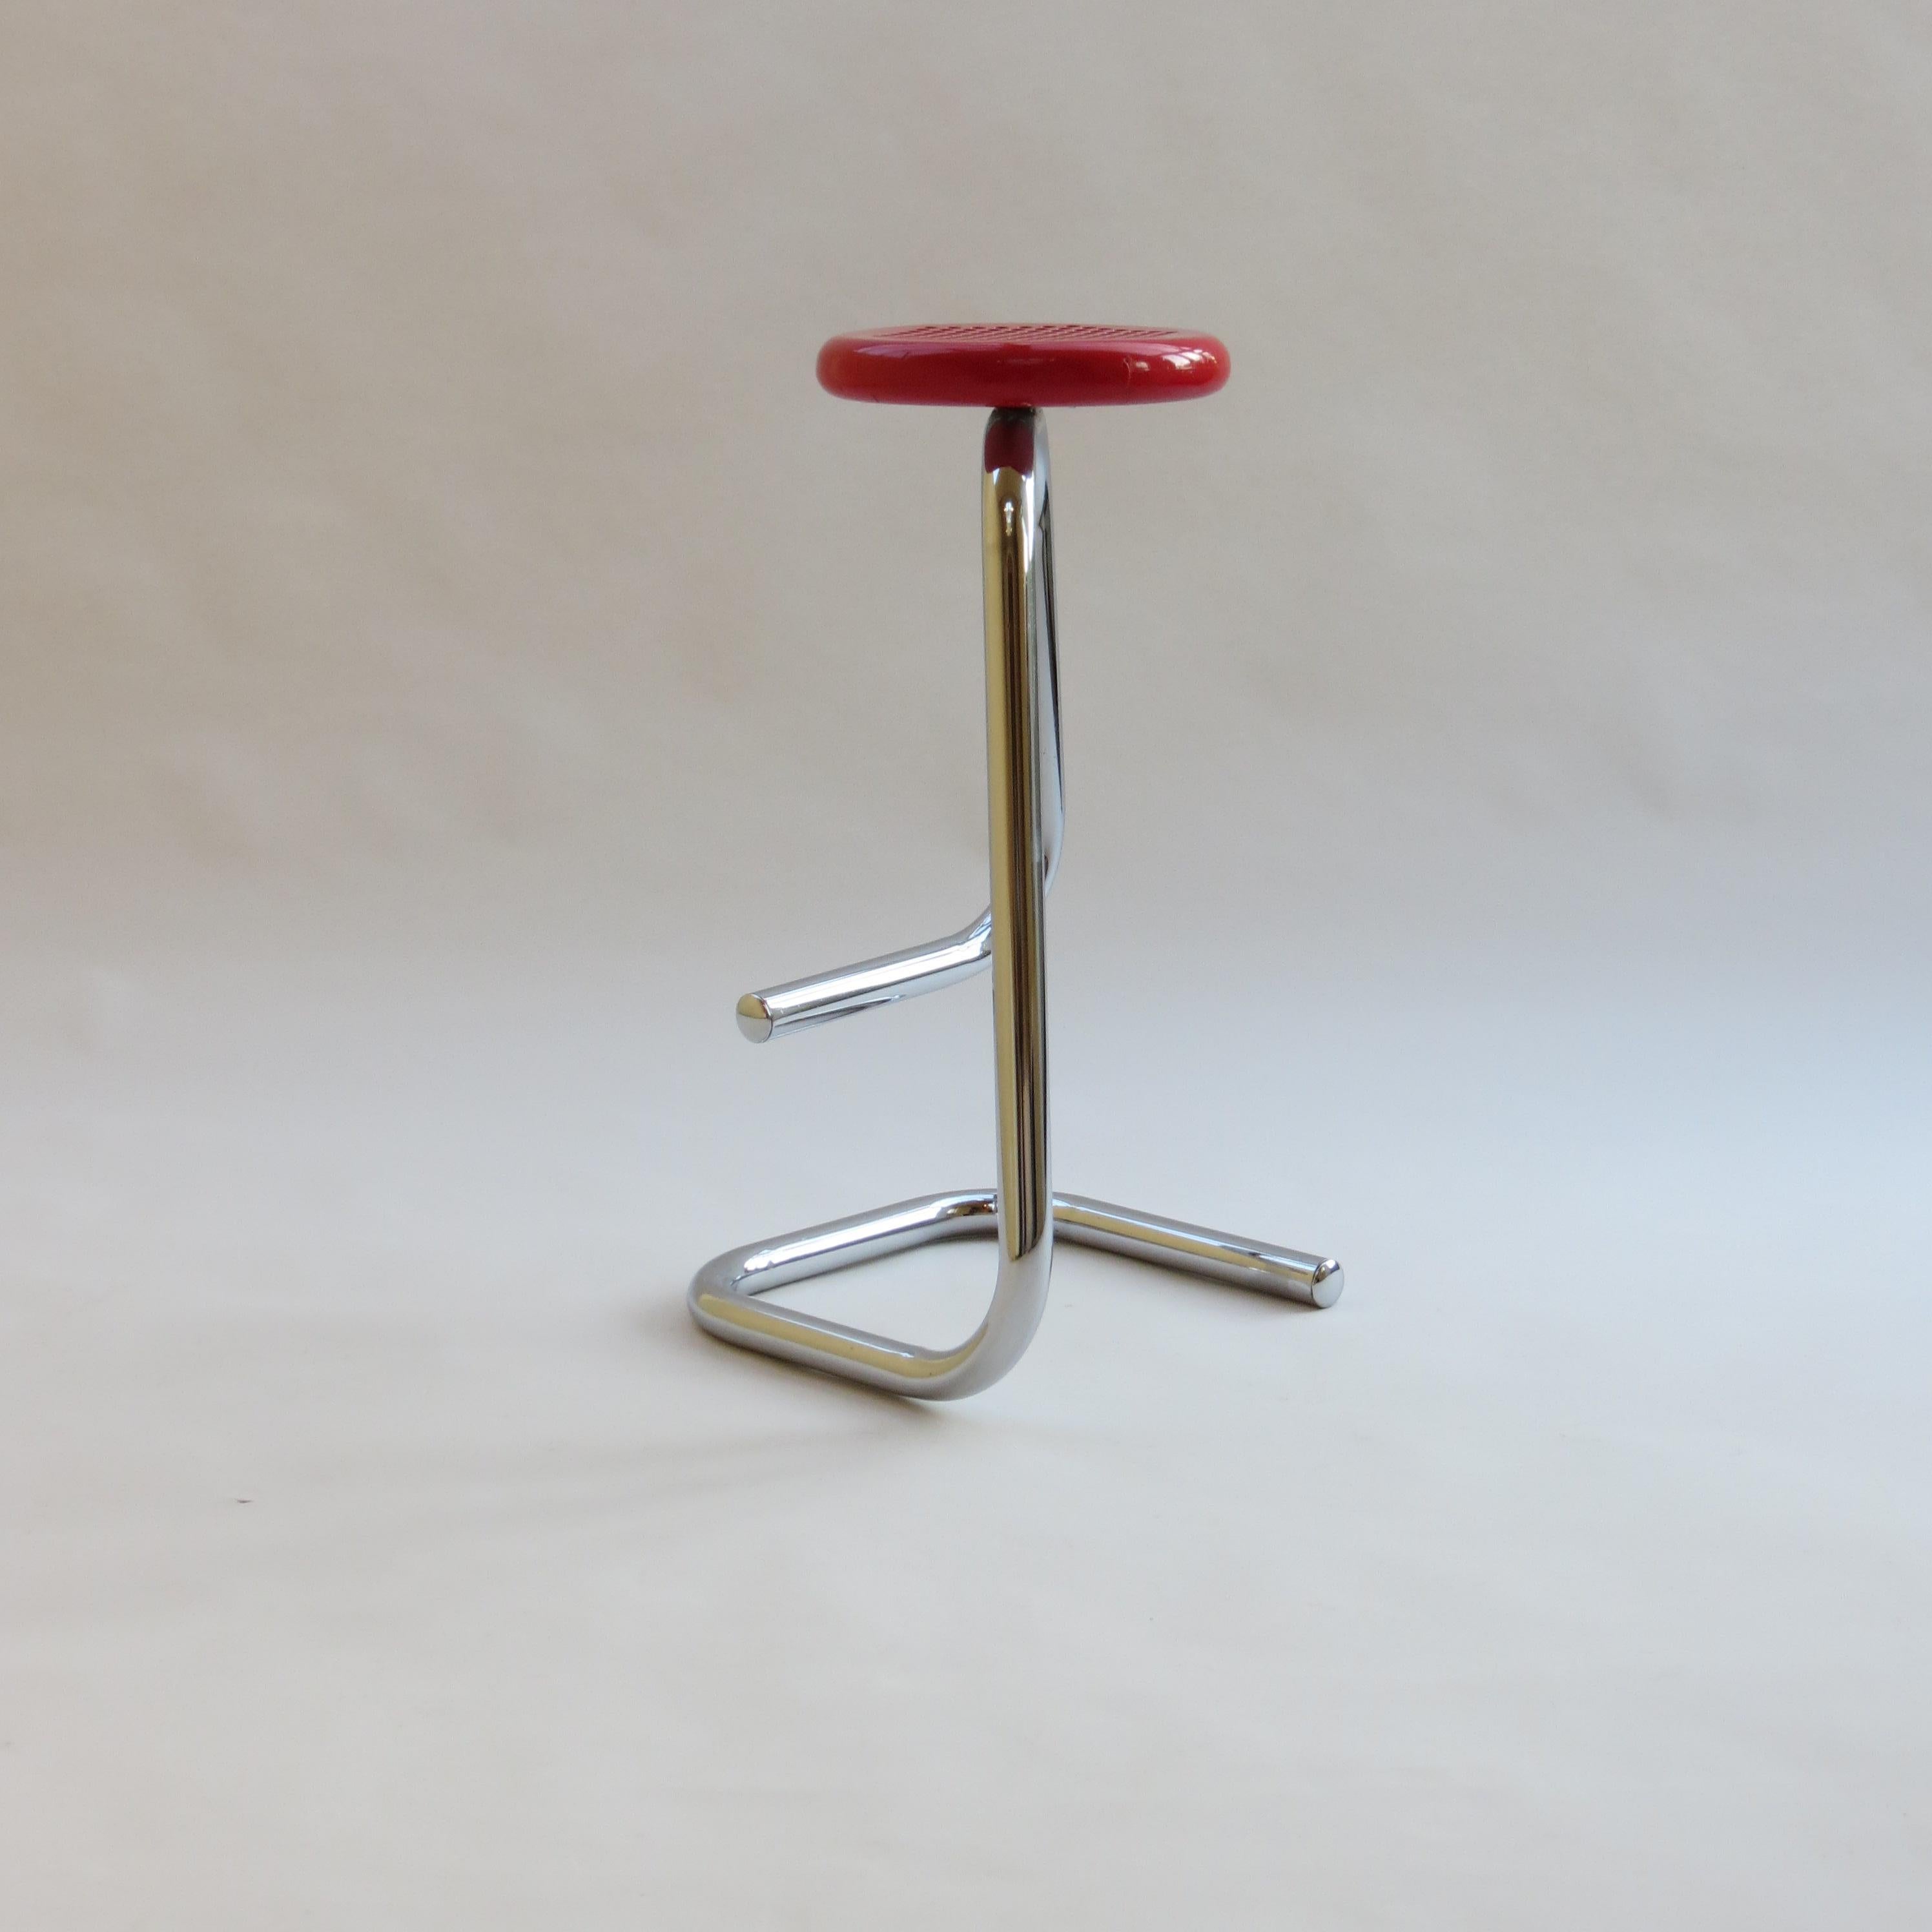 An original paperclip stool, designed by Hugh Hamilton and Philip Salmon and manufactured by Kinetics in 1969. In original condition, cantilever design solid chrome base and red resin seat.

In good vintage condition. The stool retains the